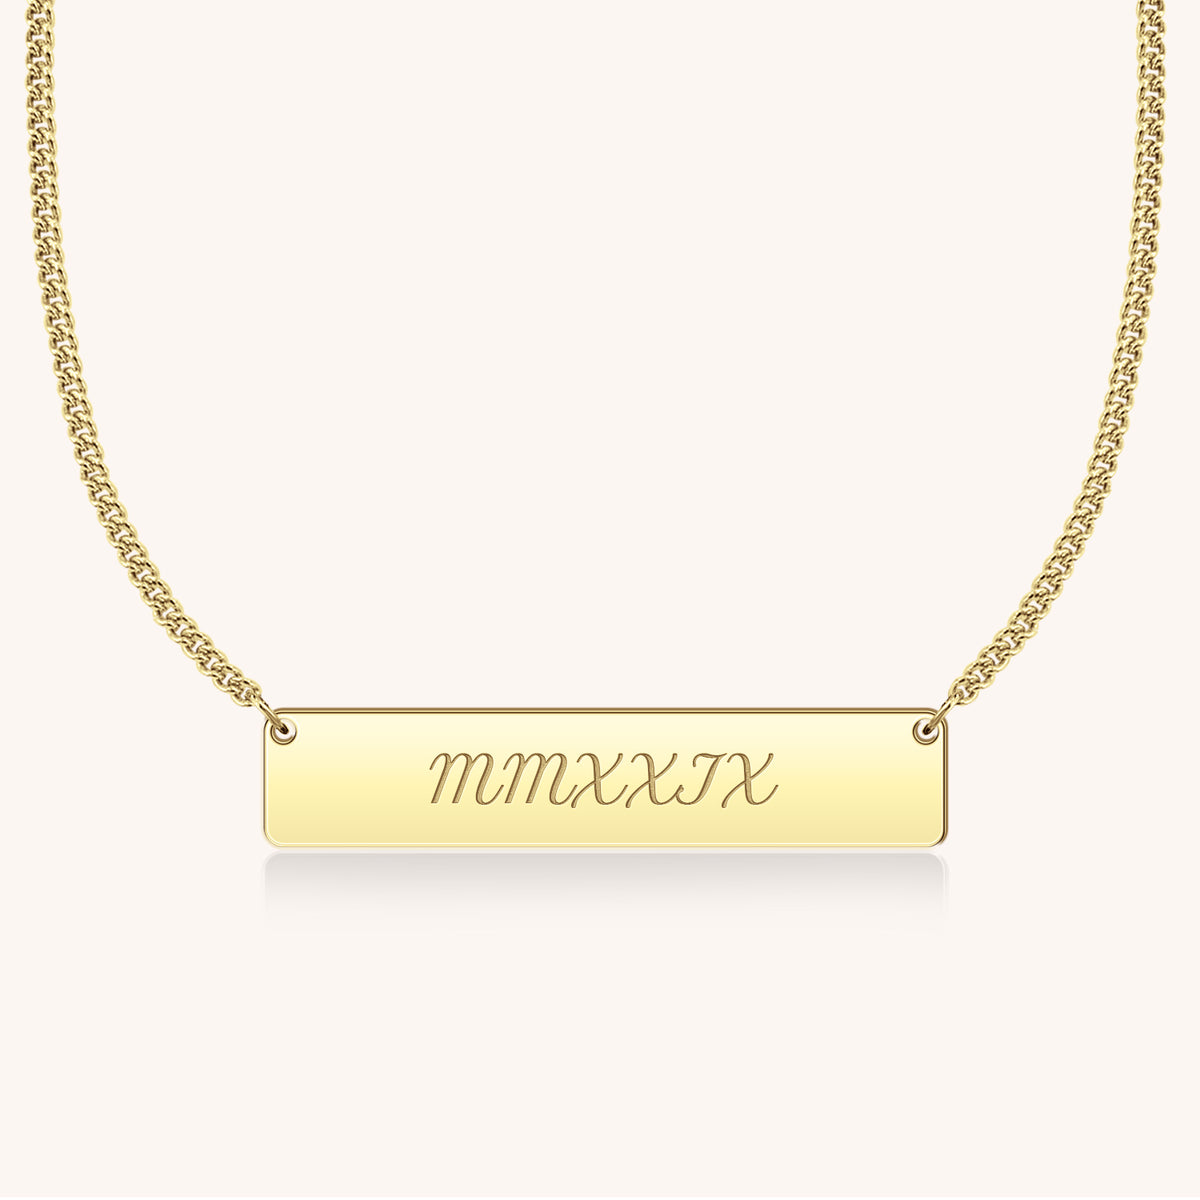 I Love You Bar Necklace in Script